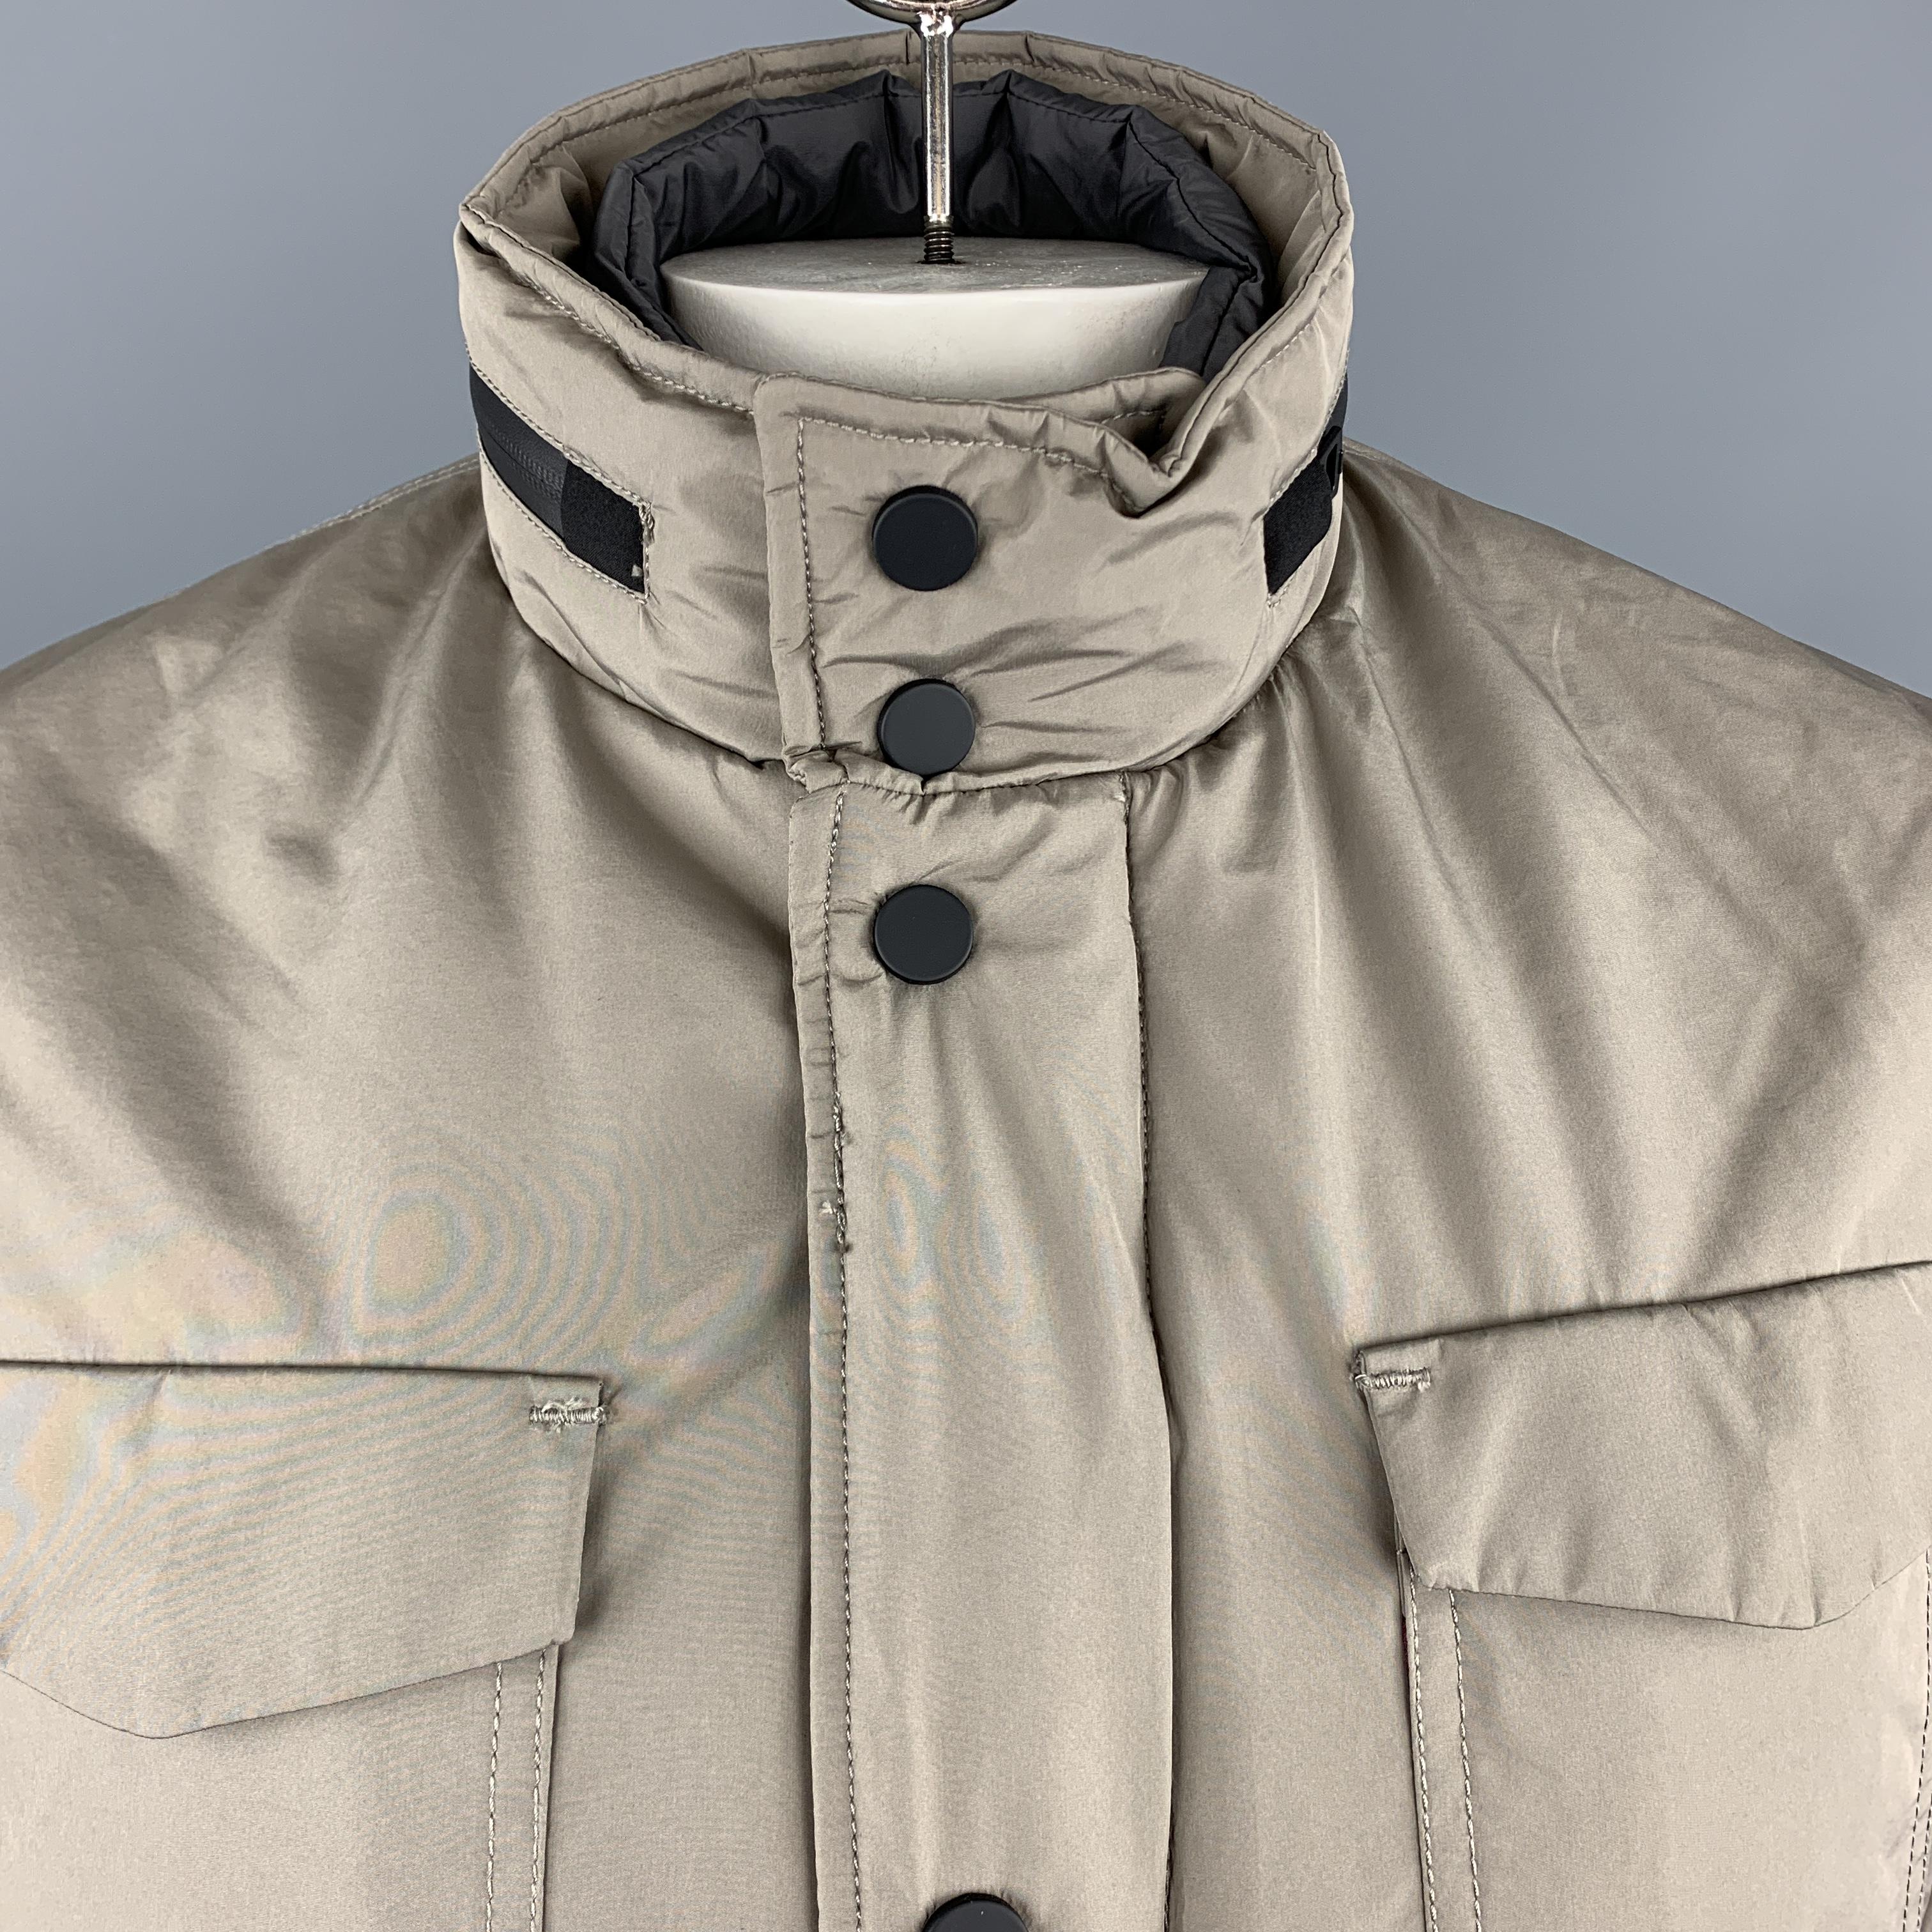 EREDI PISANO jacket comes in a khaki beige waterproof fabric with a zip up snap placket closure, patch flap pockets, waterproof zippers, high collar with tight zip out hood, and detachable front panel. Made in Italy.

New With Tags. 
Marked: